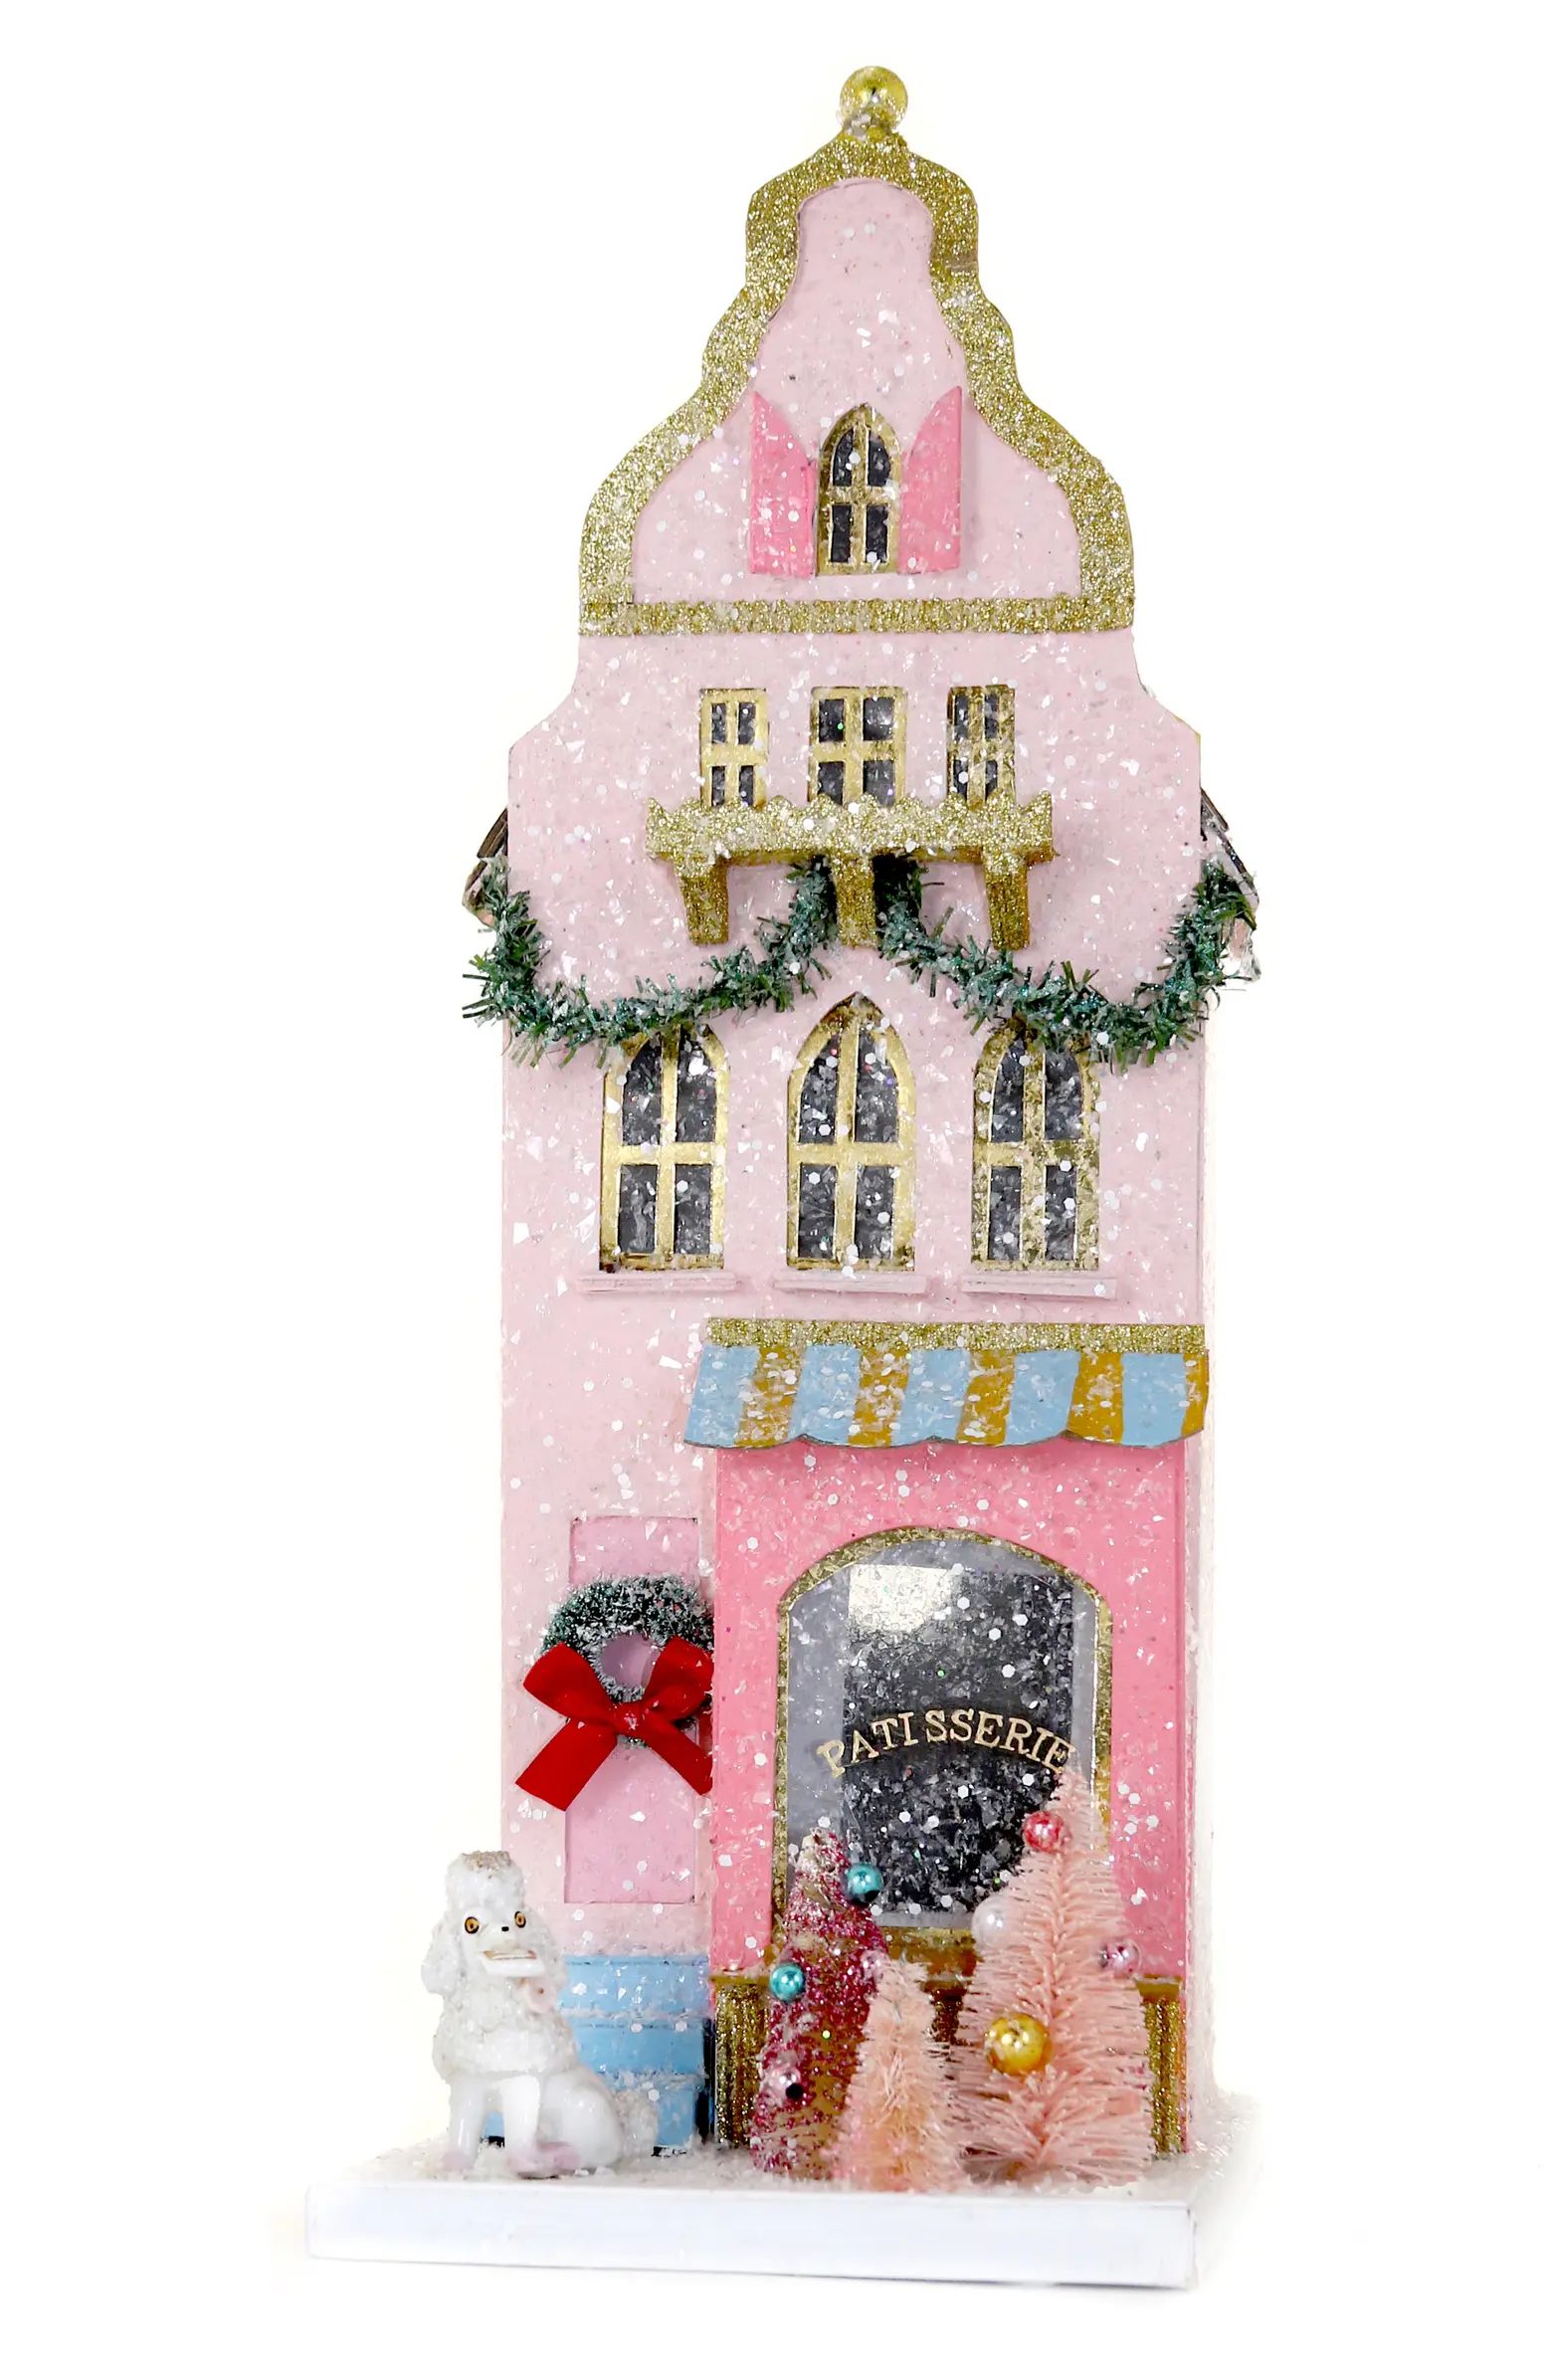 Cody Foster & Co. Cody Foster Patisserie Shop Holiday Decoration | Nordstrom | Nordstrom